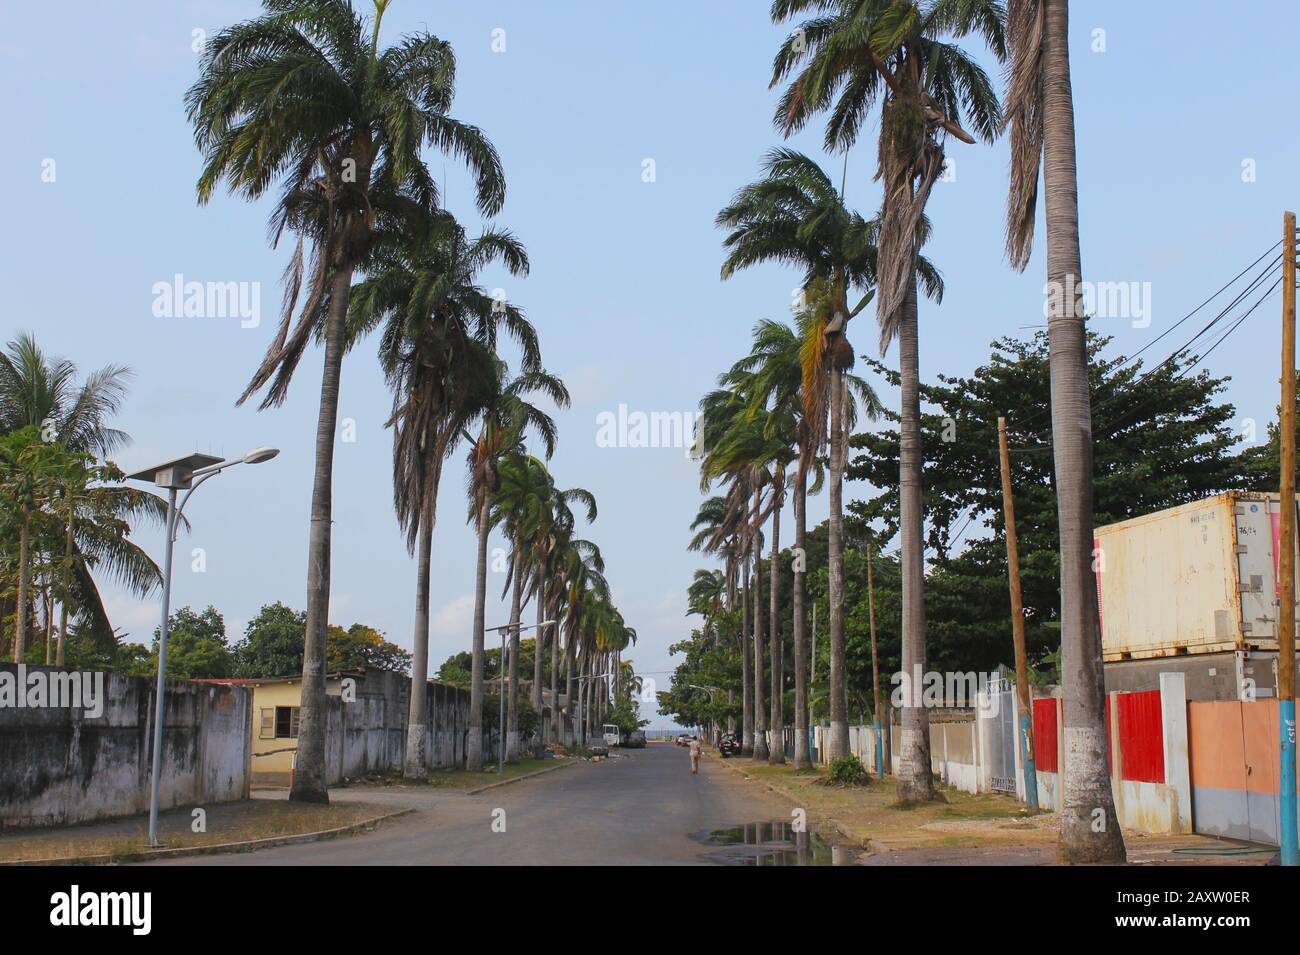 A street with palm trees in the city of Sao Tome. Stock Photo